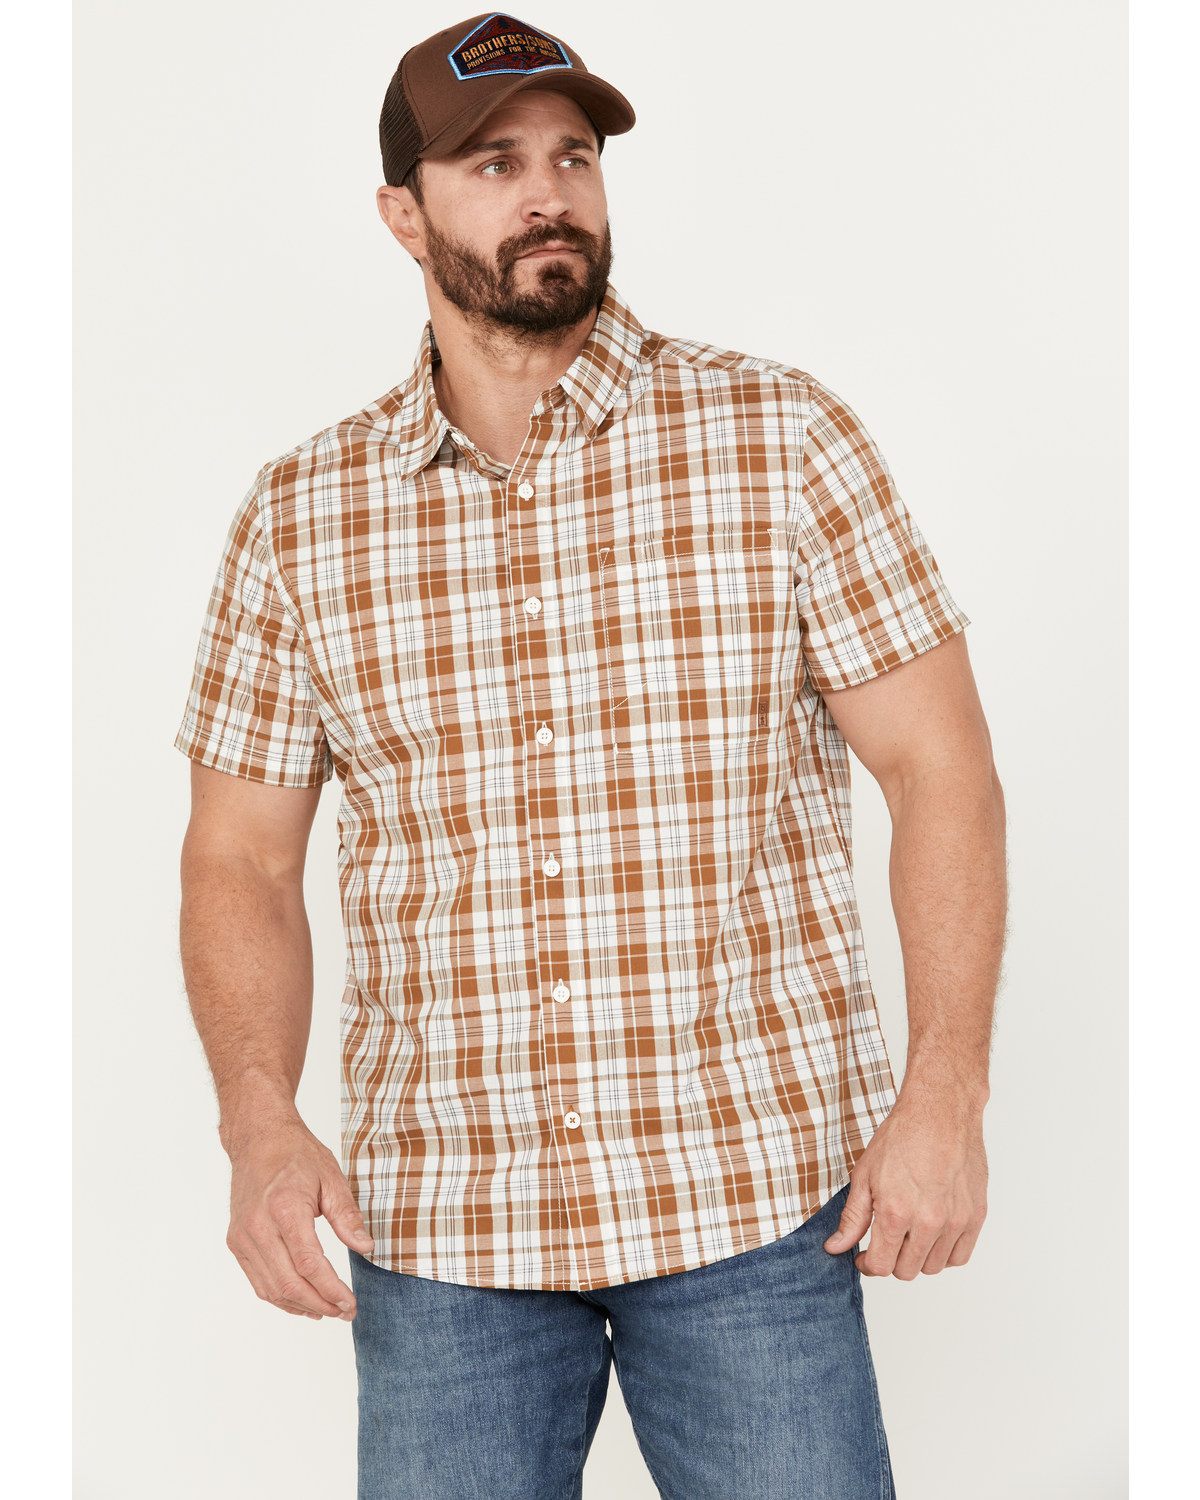 Brothers and Sons Men's Tulsa Plaid Print Short Sleeve Button-Down Western Shirt